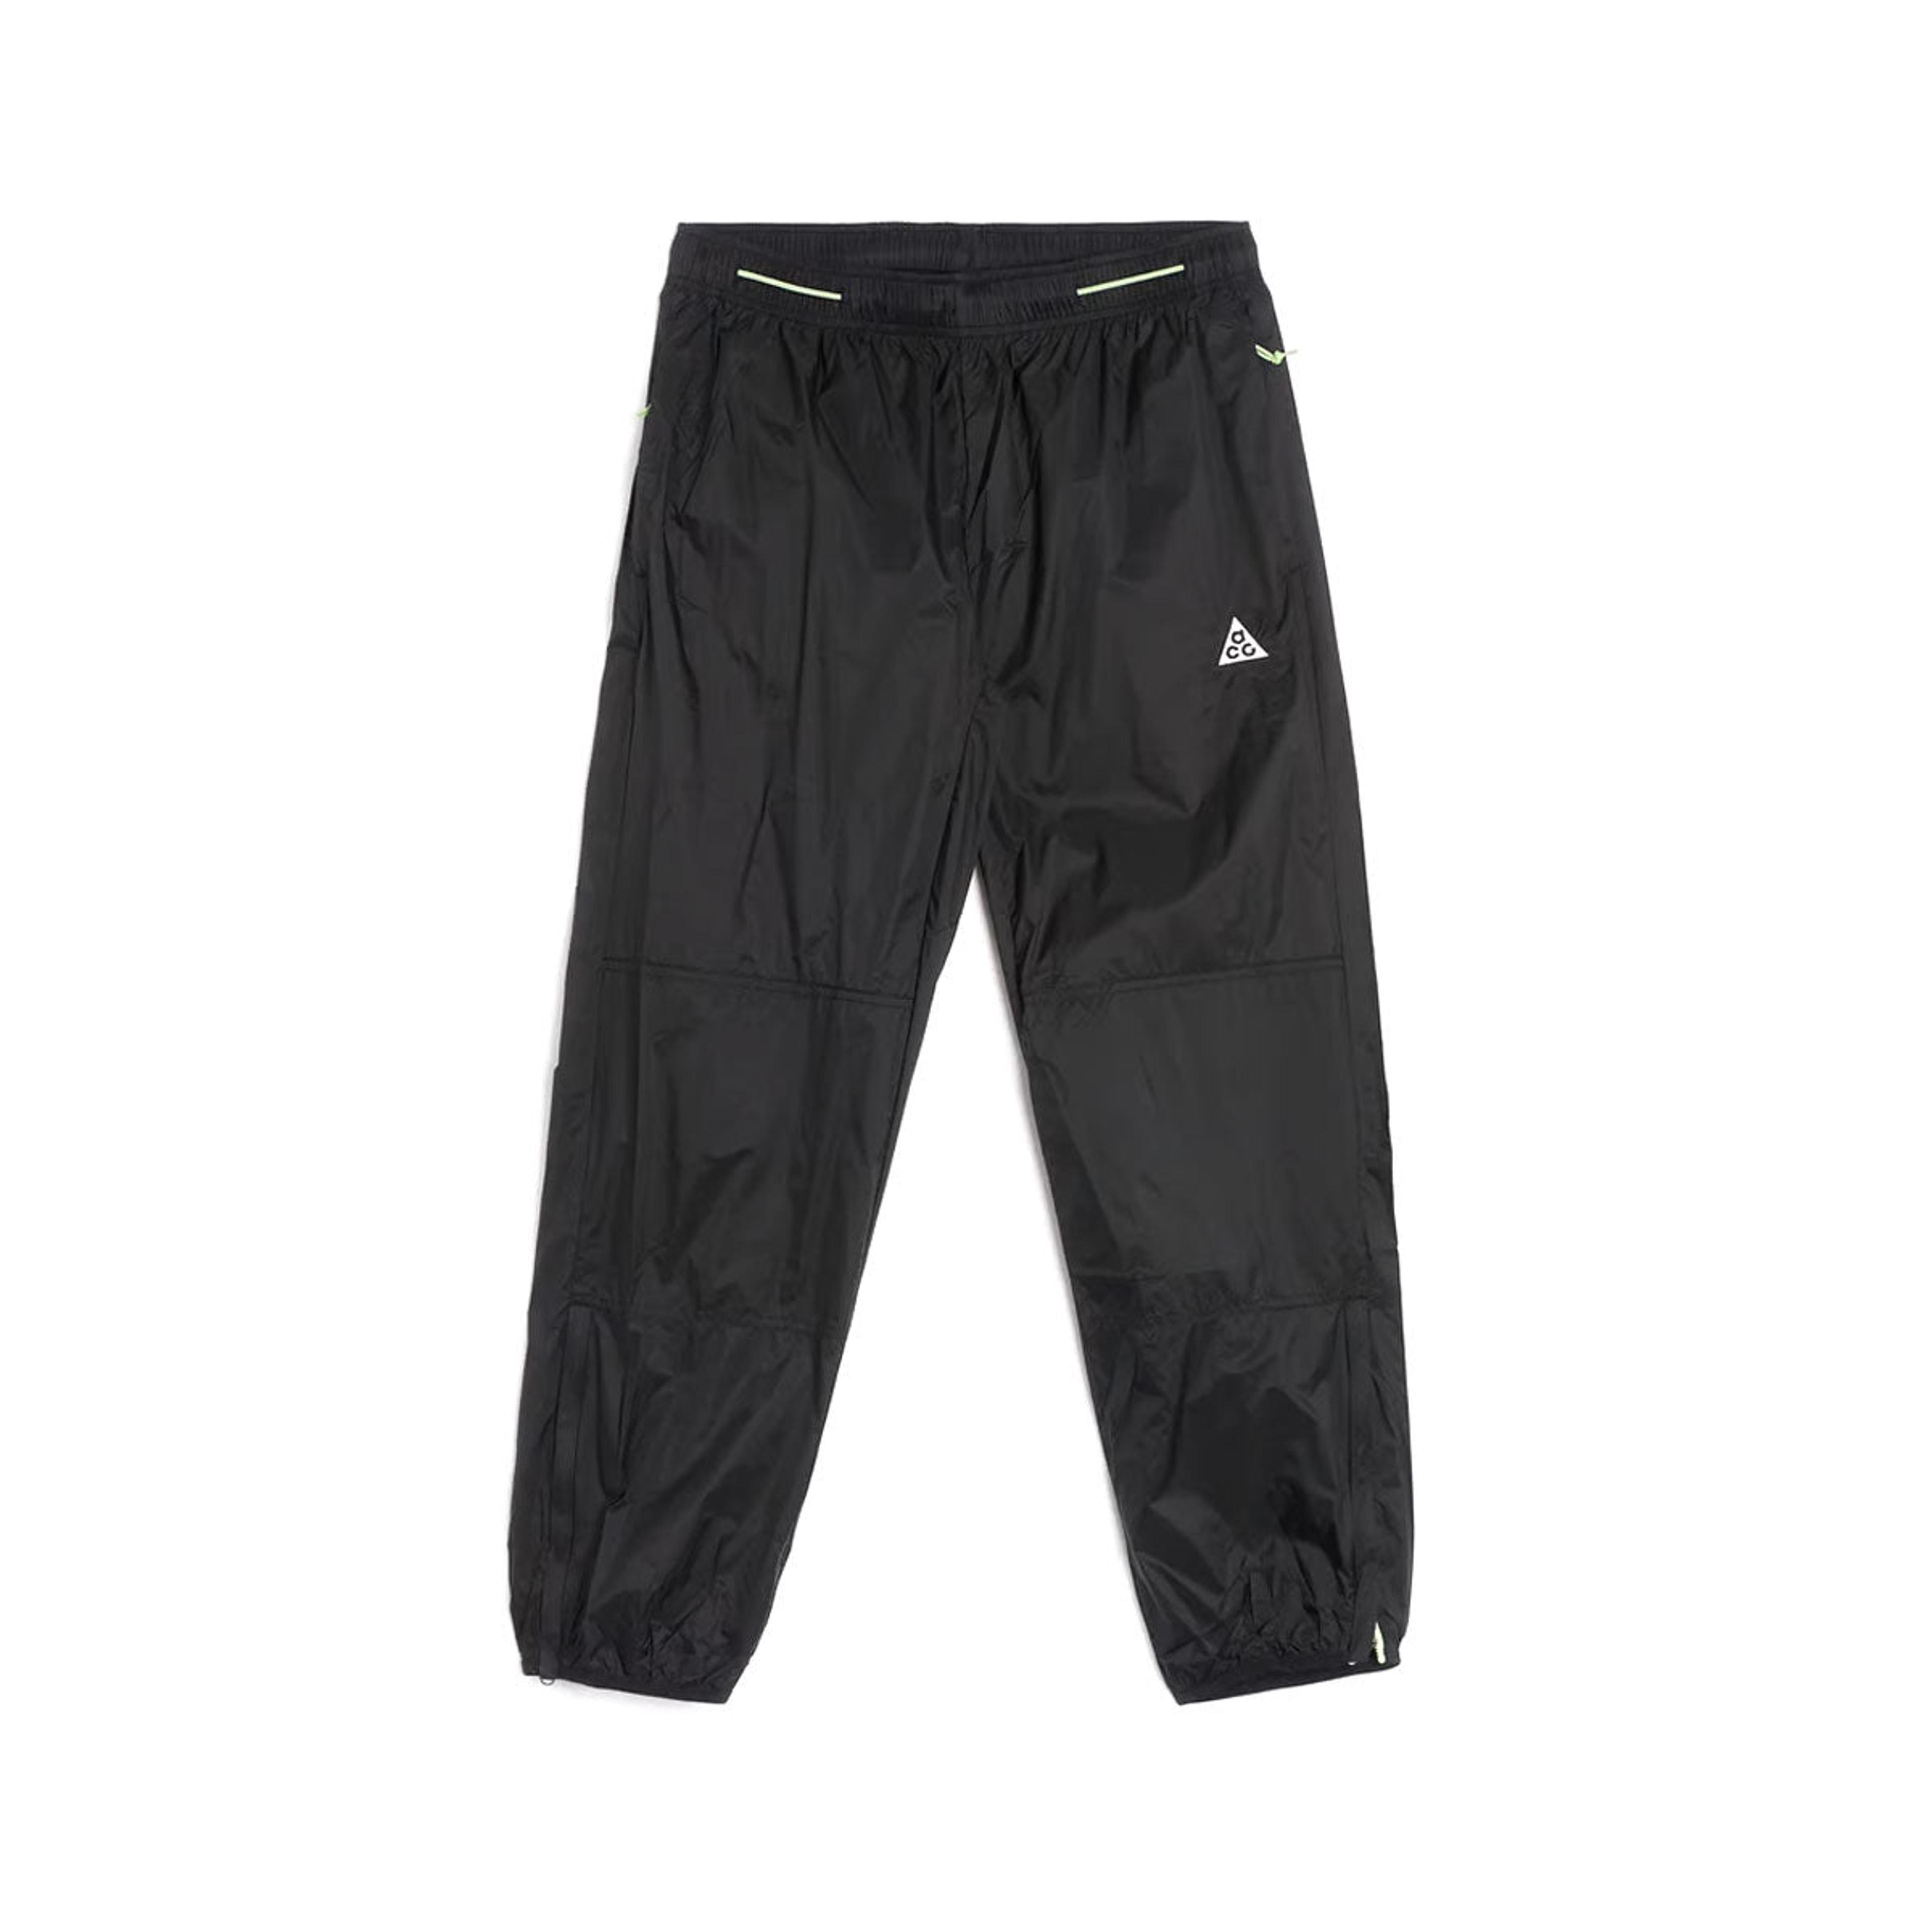 Nike Men's ACG "Cinder Cone" Windshell Trousers